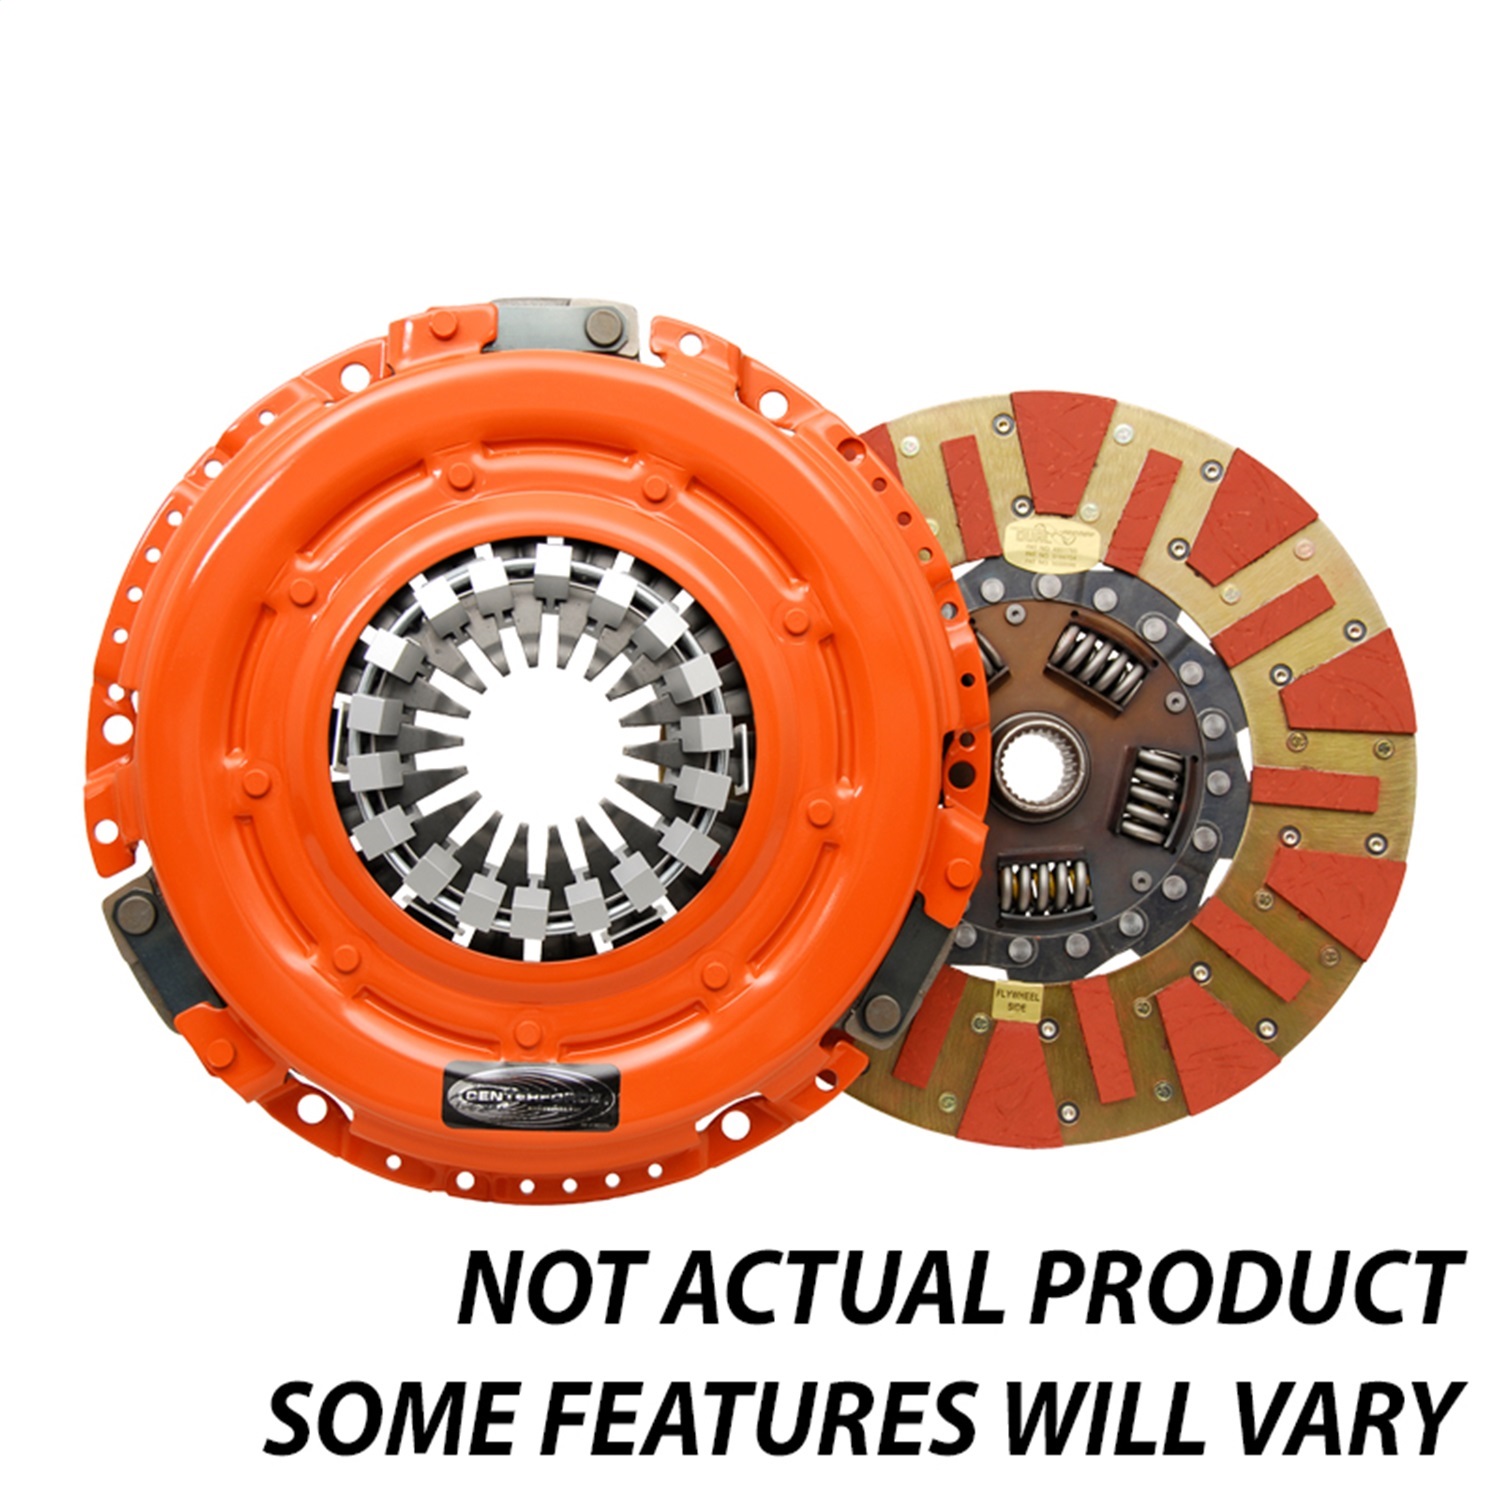 Centerforce Centerforce DF009032 Dual Friction Clutch Pressure Plate And Disc Set